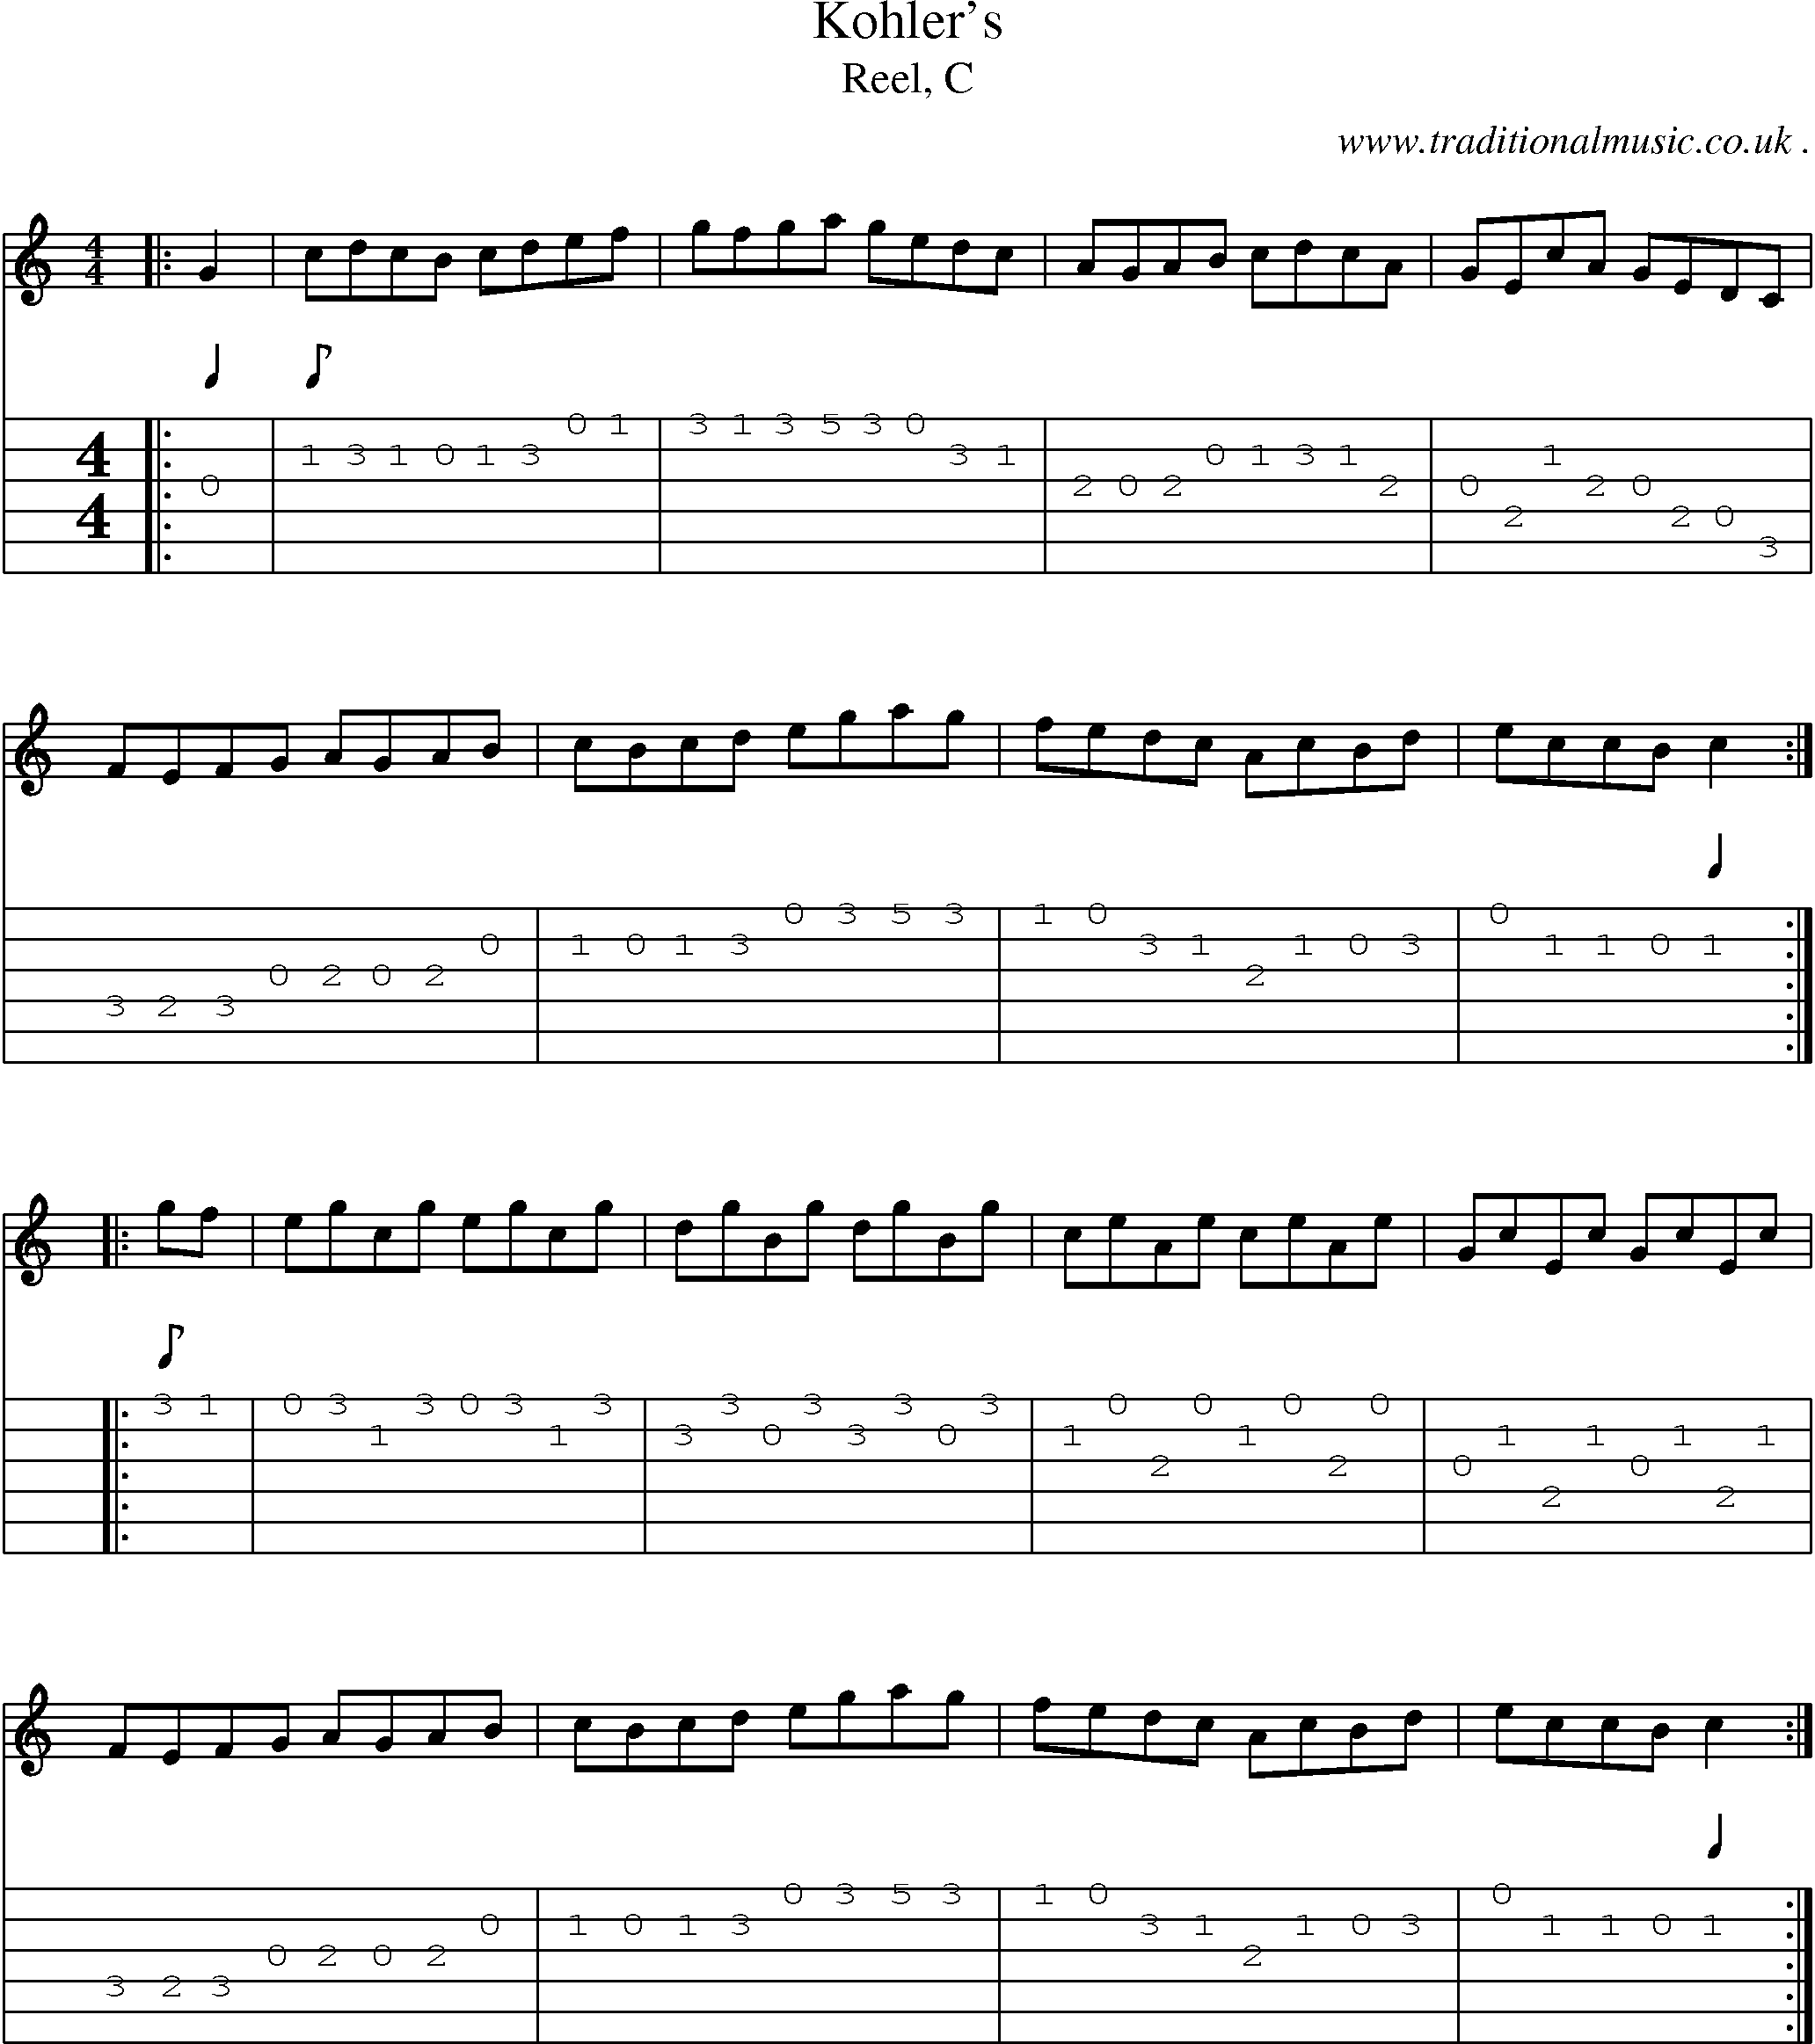 Sheet-music  score, Chords and Guitar Tabs for Kohlers